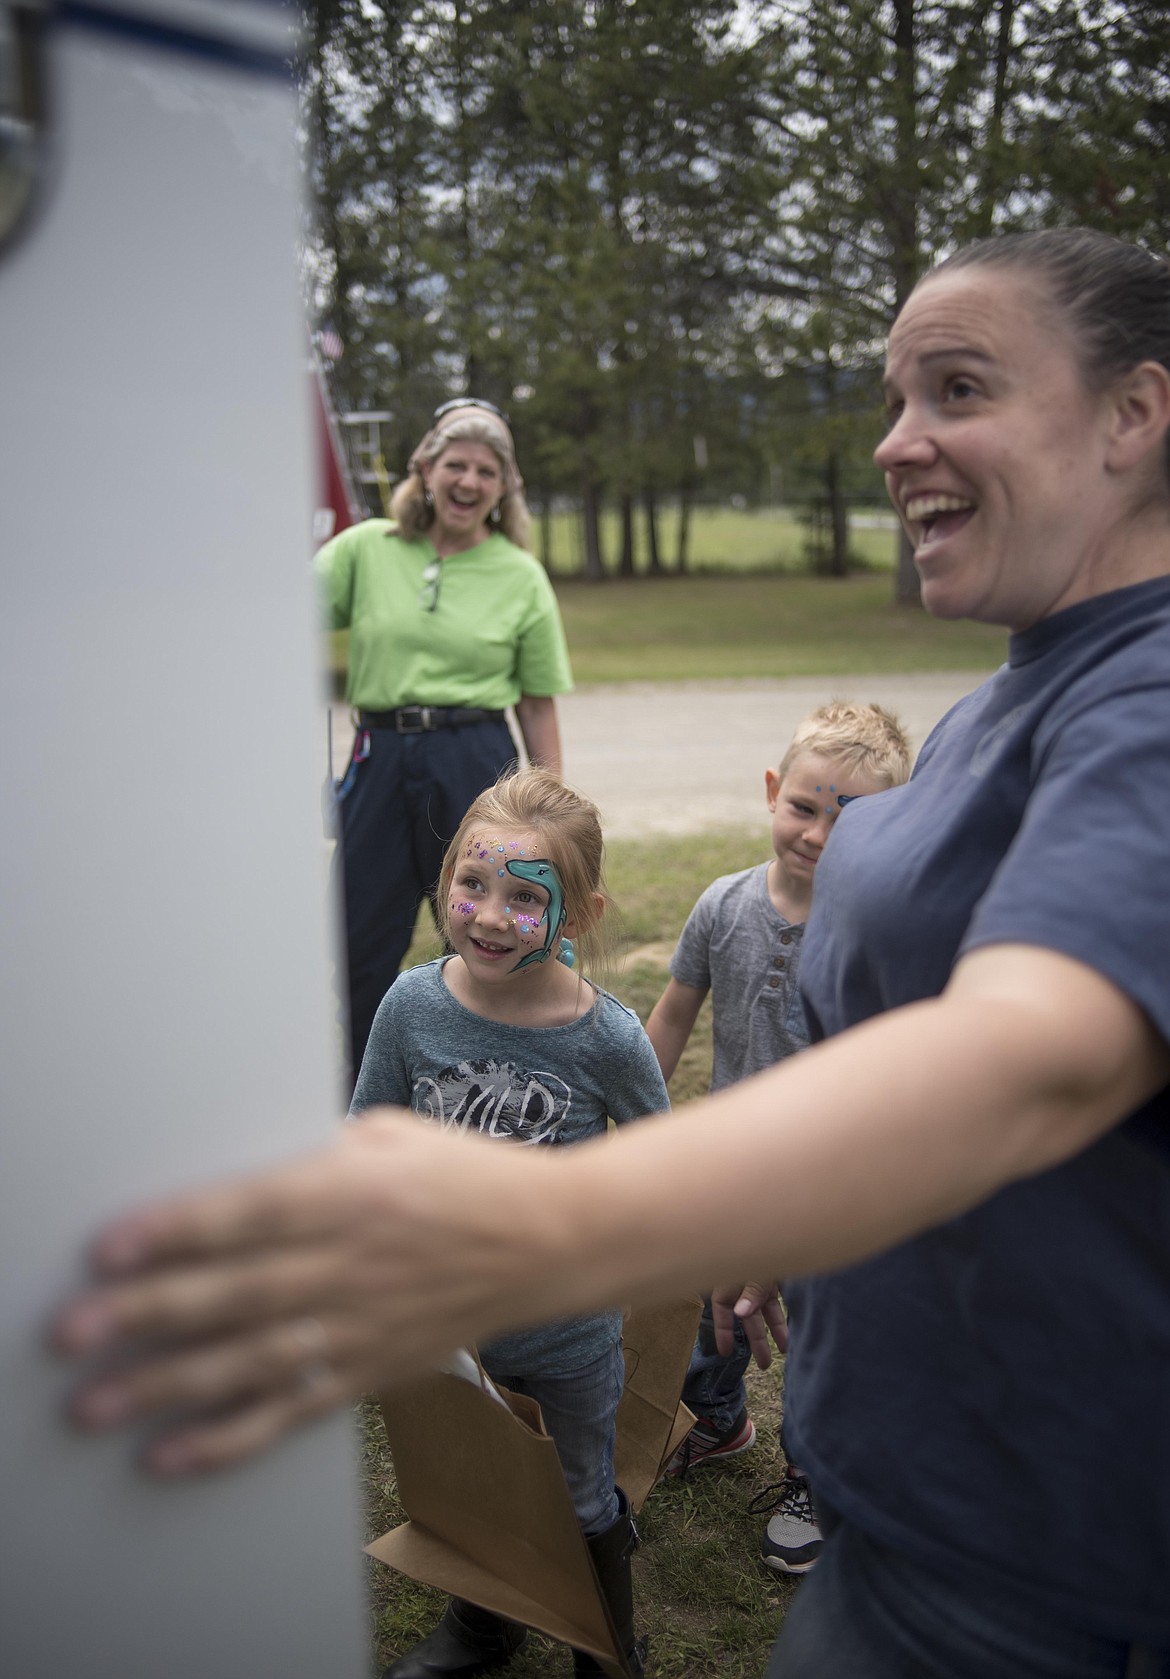 Troy Volunteer Ambulance staff, Janet Miller, left, and Amy Snow right, show Sybil Tucker, middle, the oxygen tank inside of their ambulance, Wednesday at the McCormick School Rendezvous. (Luke Hollister/The Western News)